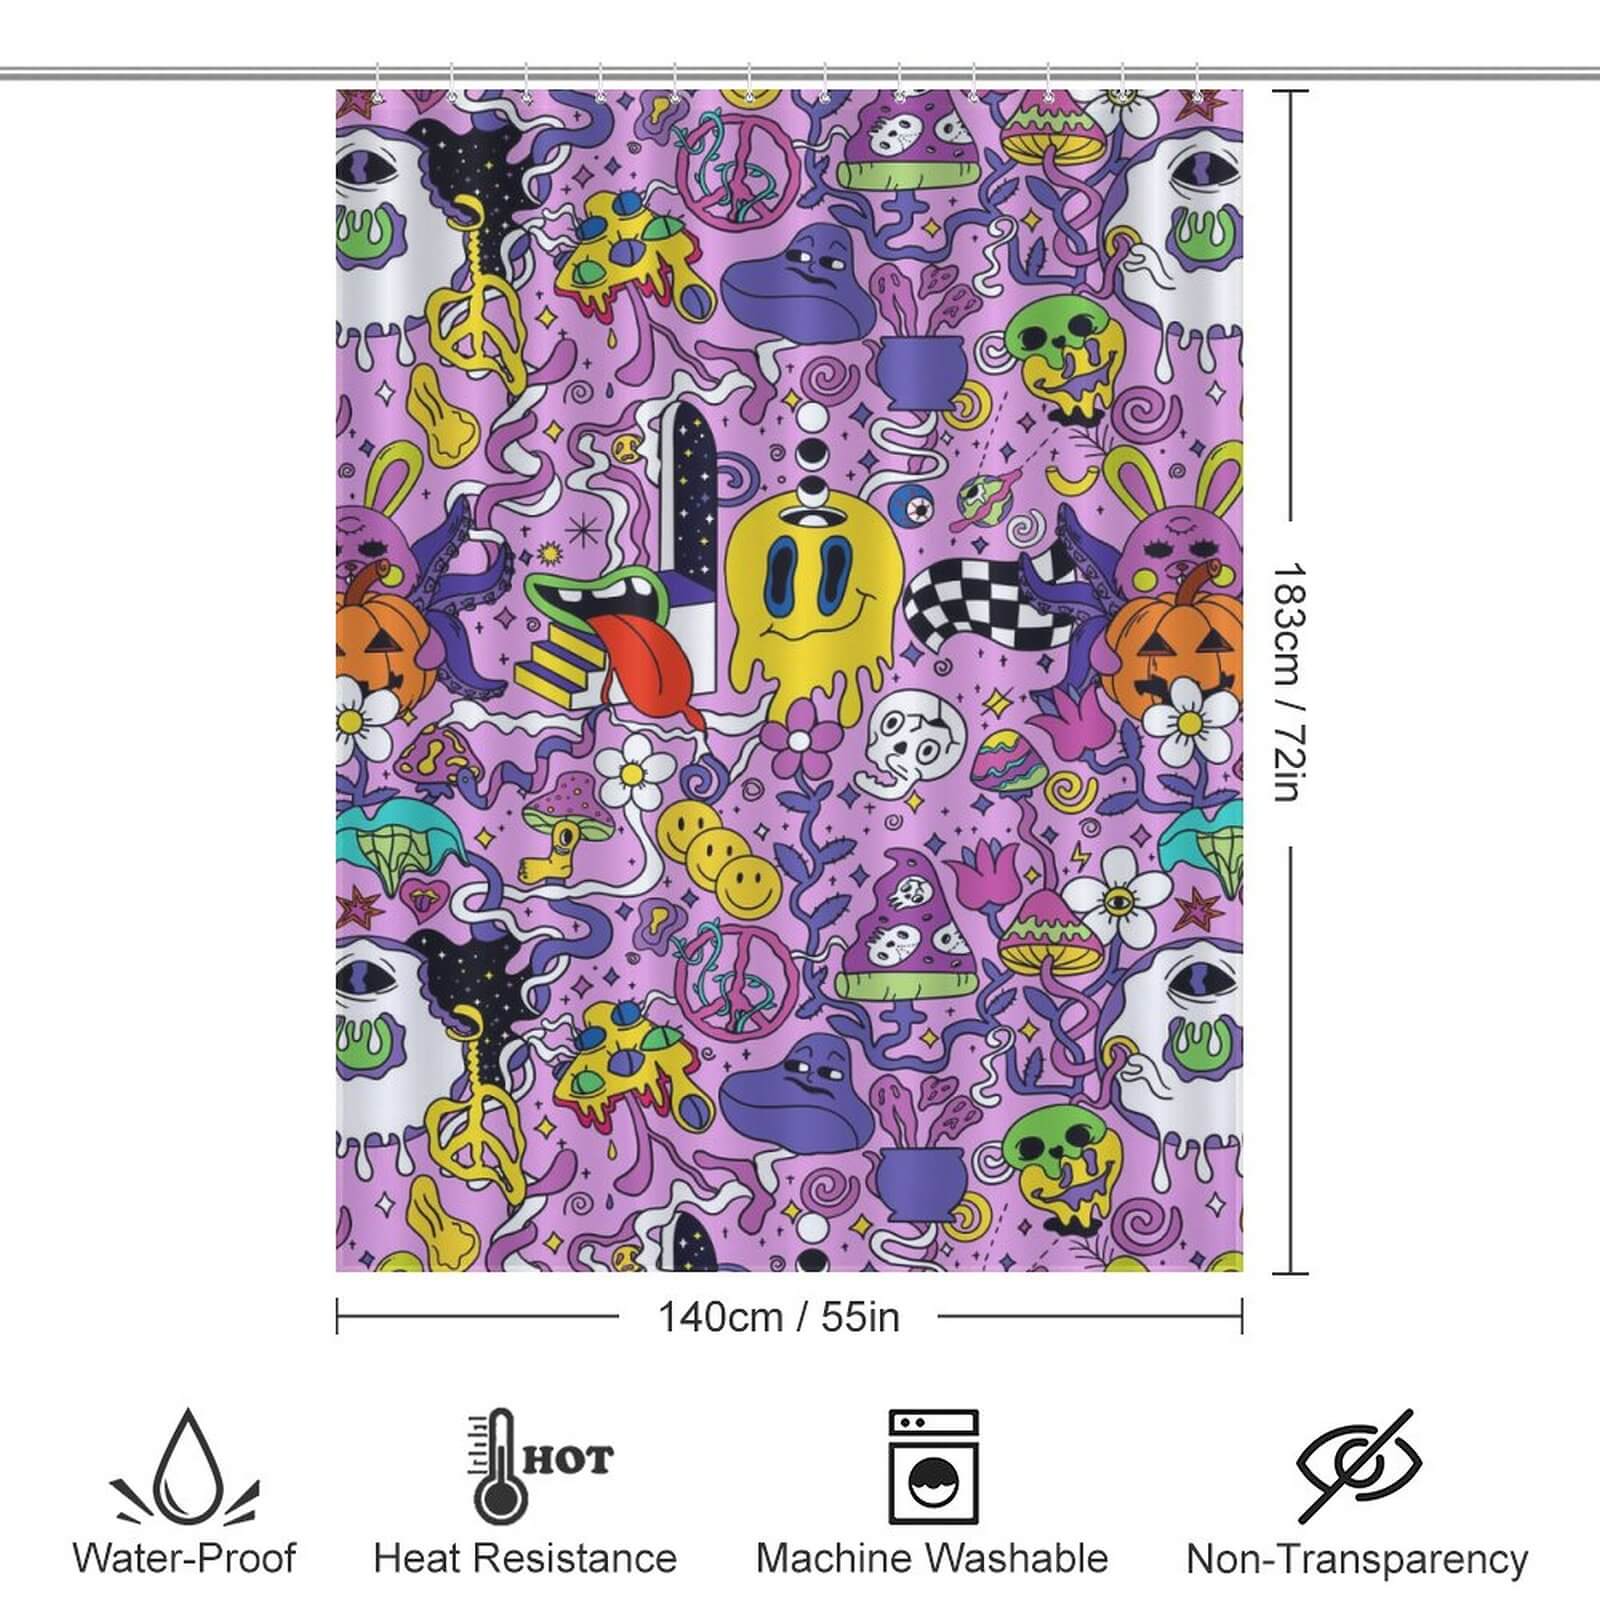 A Psychedelic Trippy Shower Curtain-Cottoncat featuring a design of monsters and ghosts, made by Cotton Cat.